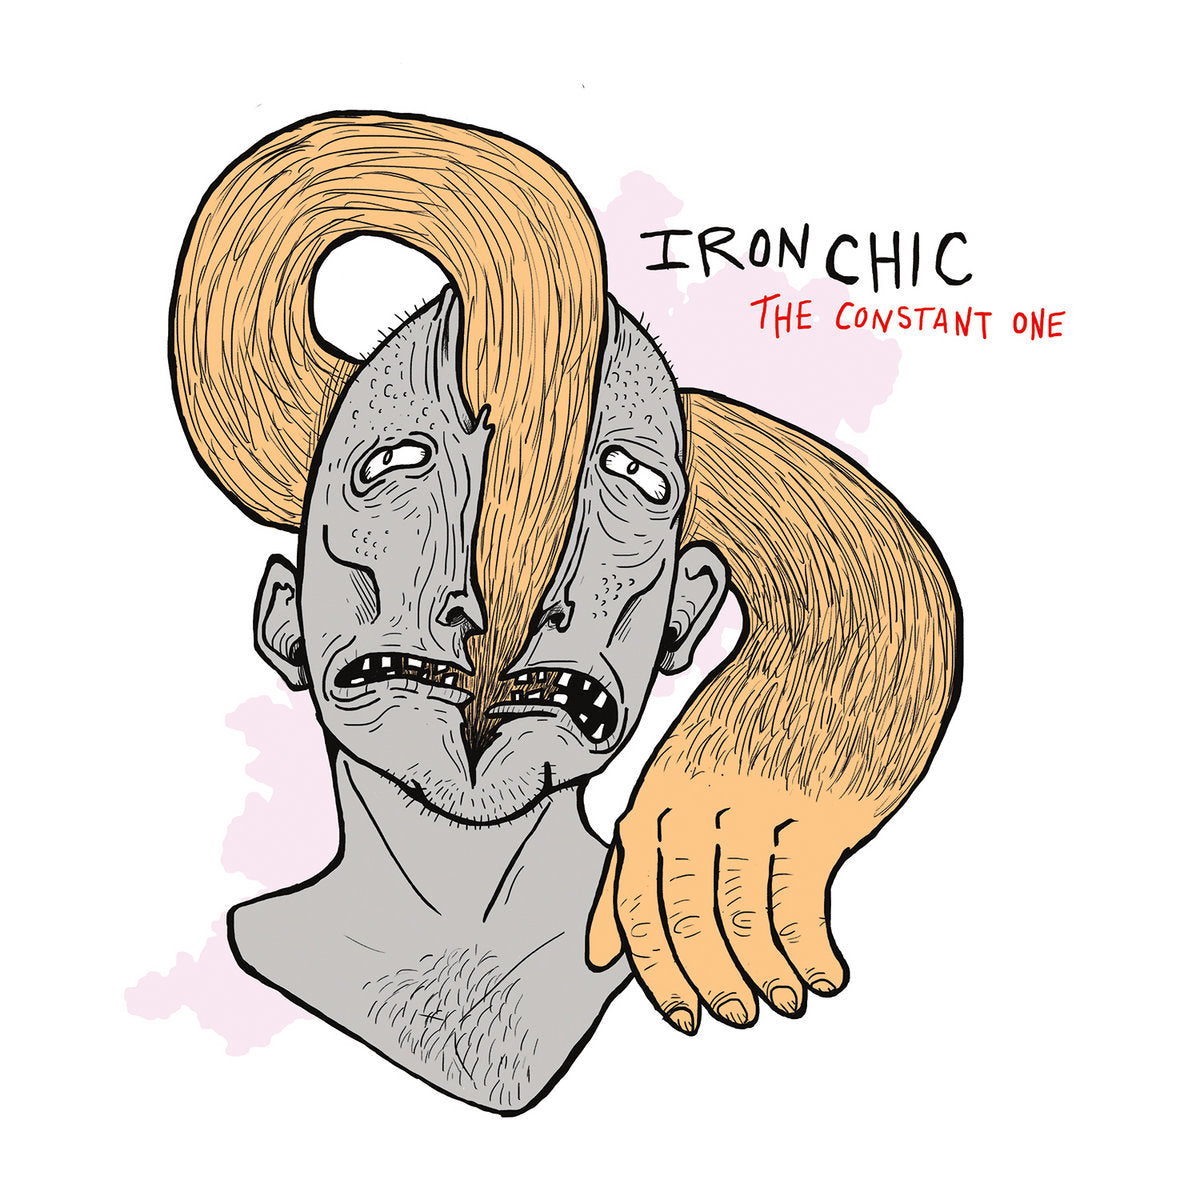 Iron Chic "The Constant One" CD